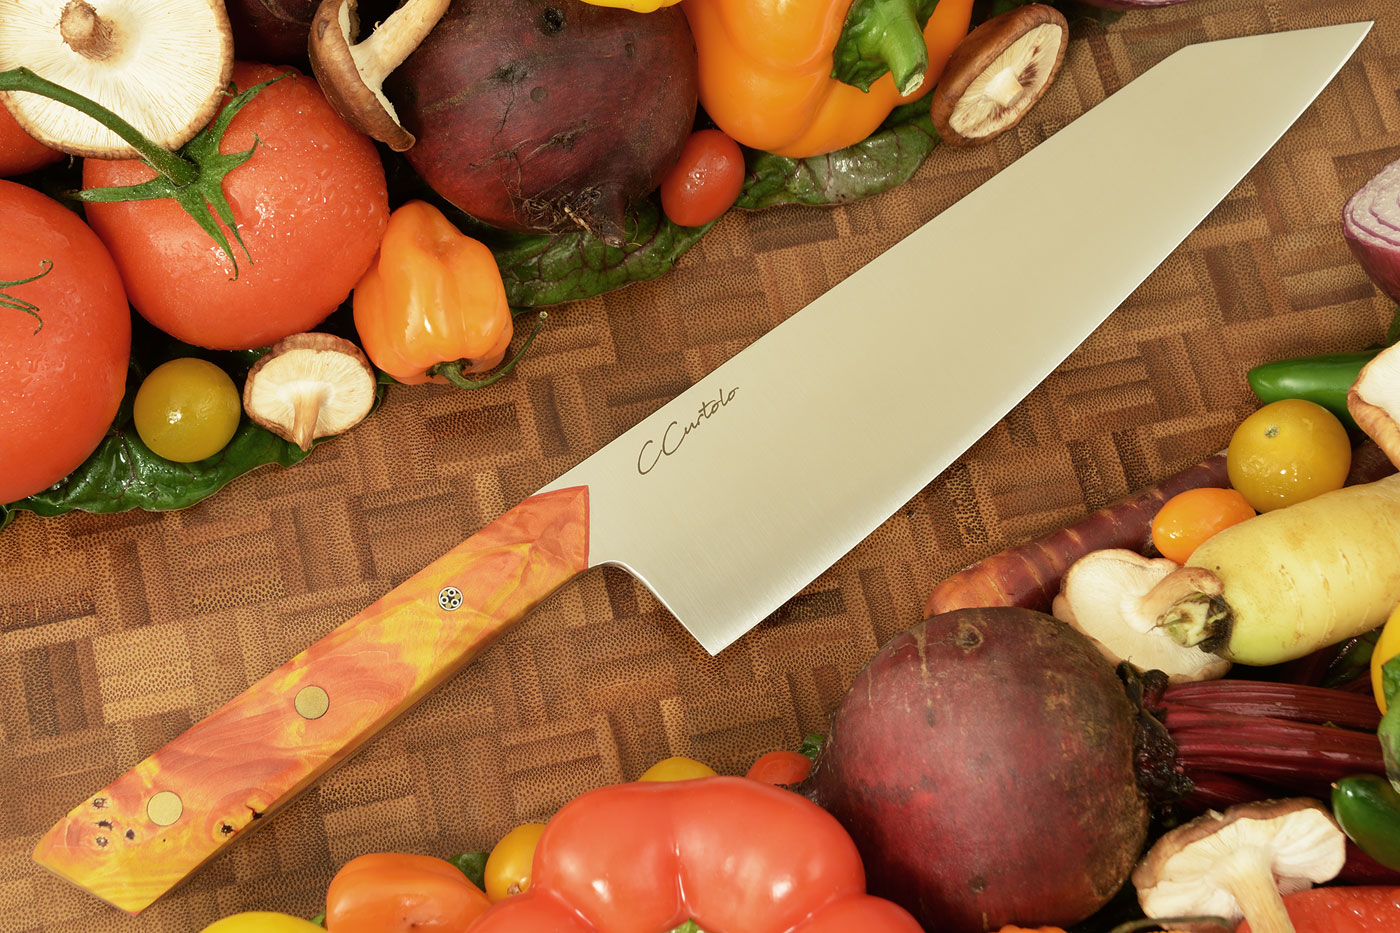 Chef's Knife (8-1/2